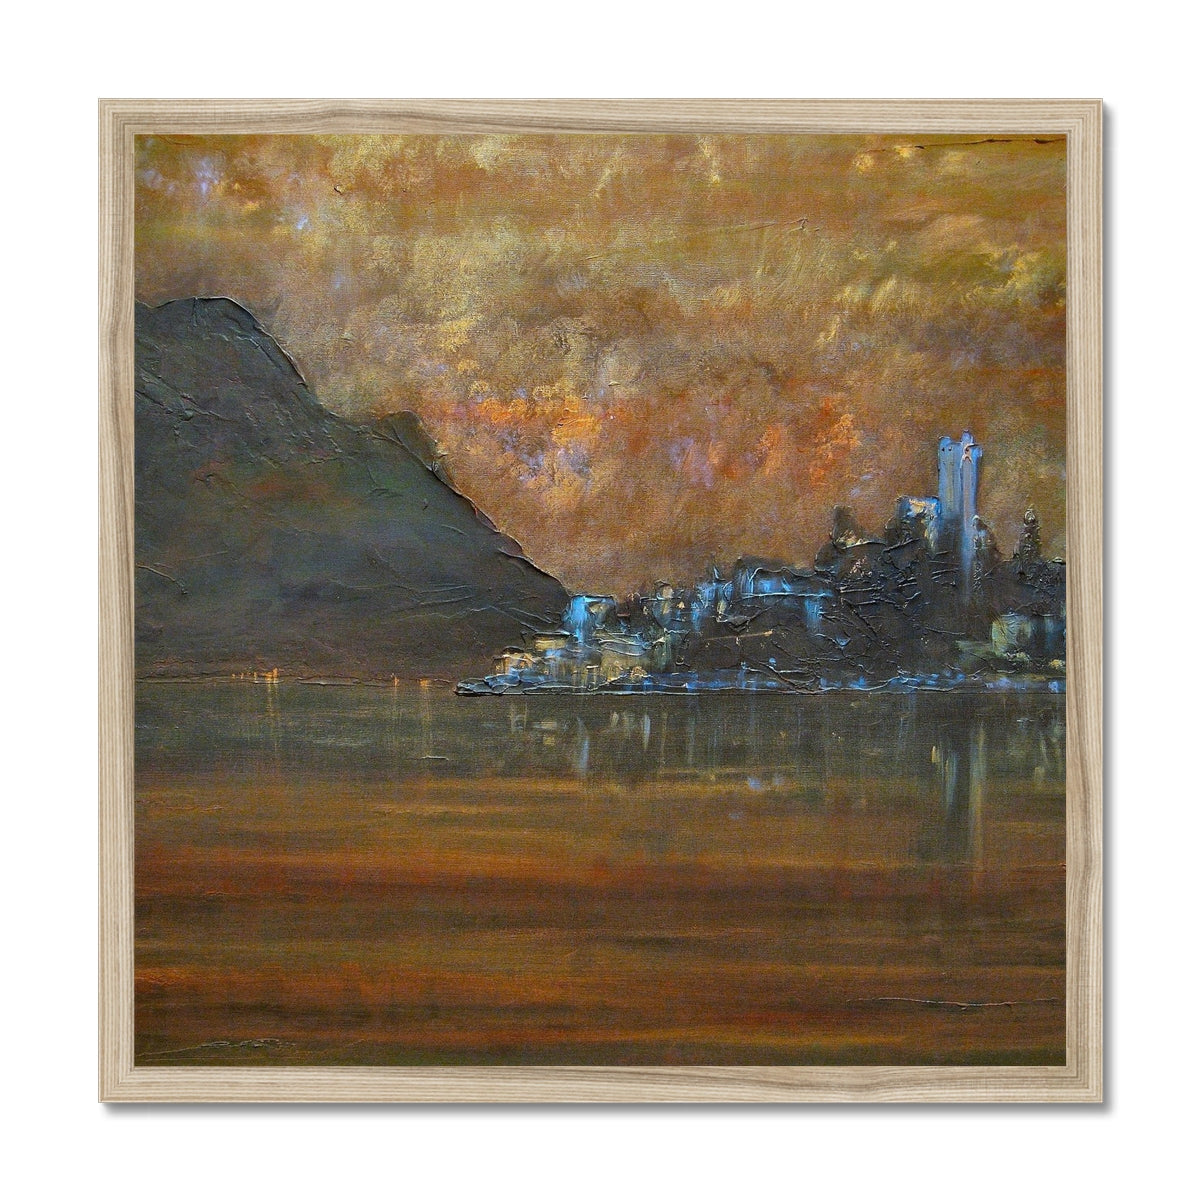 Lake Garda Dusk Italy Painting | Framed Prints From Scotland-Framed Prints-World Art Gallery-20"x20"-Natural Frame-Paintings, Prints, Homeware, Art Gifts From Scotland By Scottish Artist Kevin Hunter